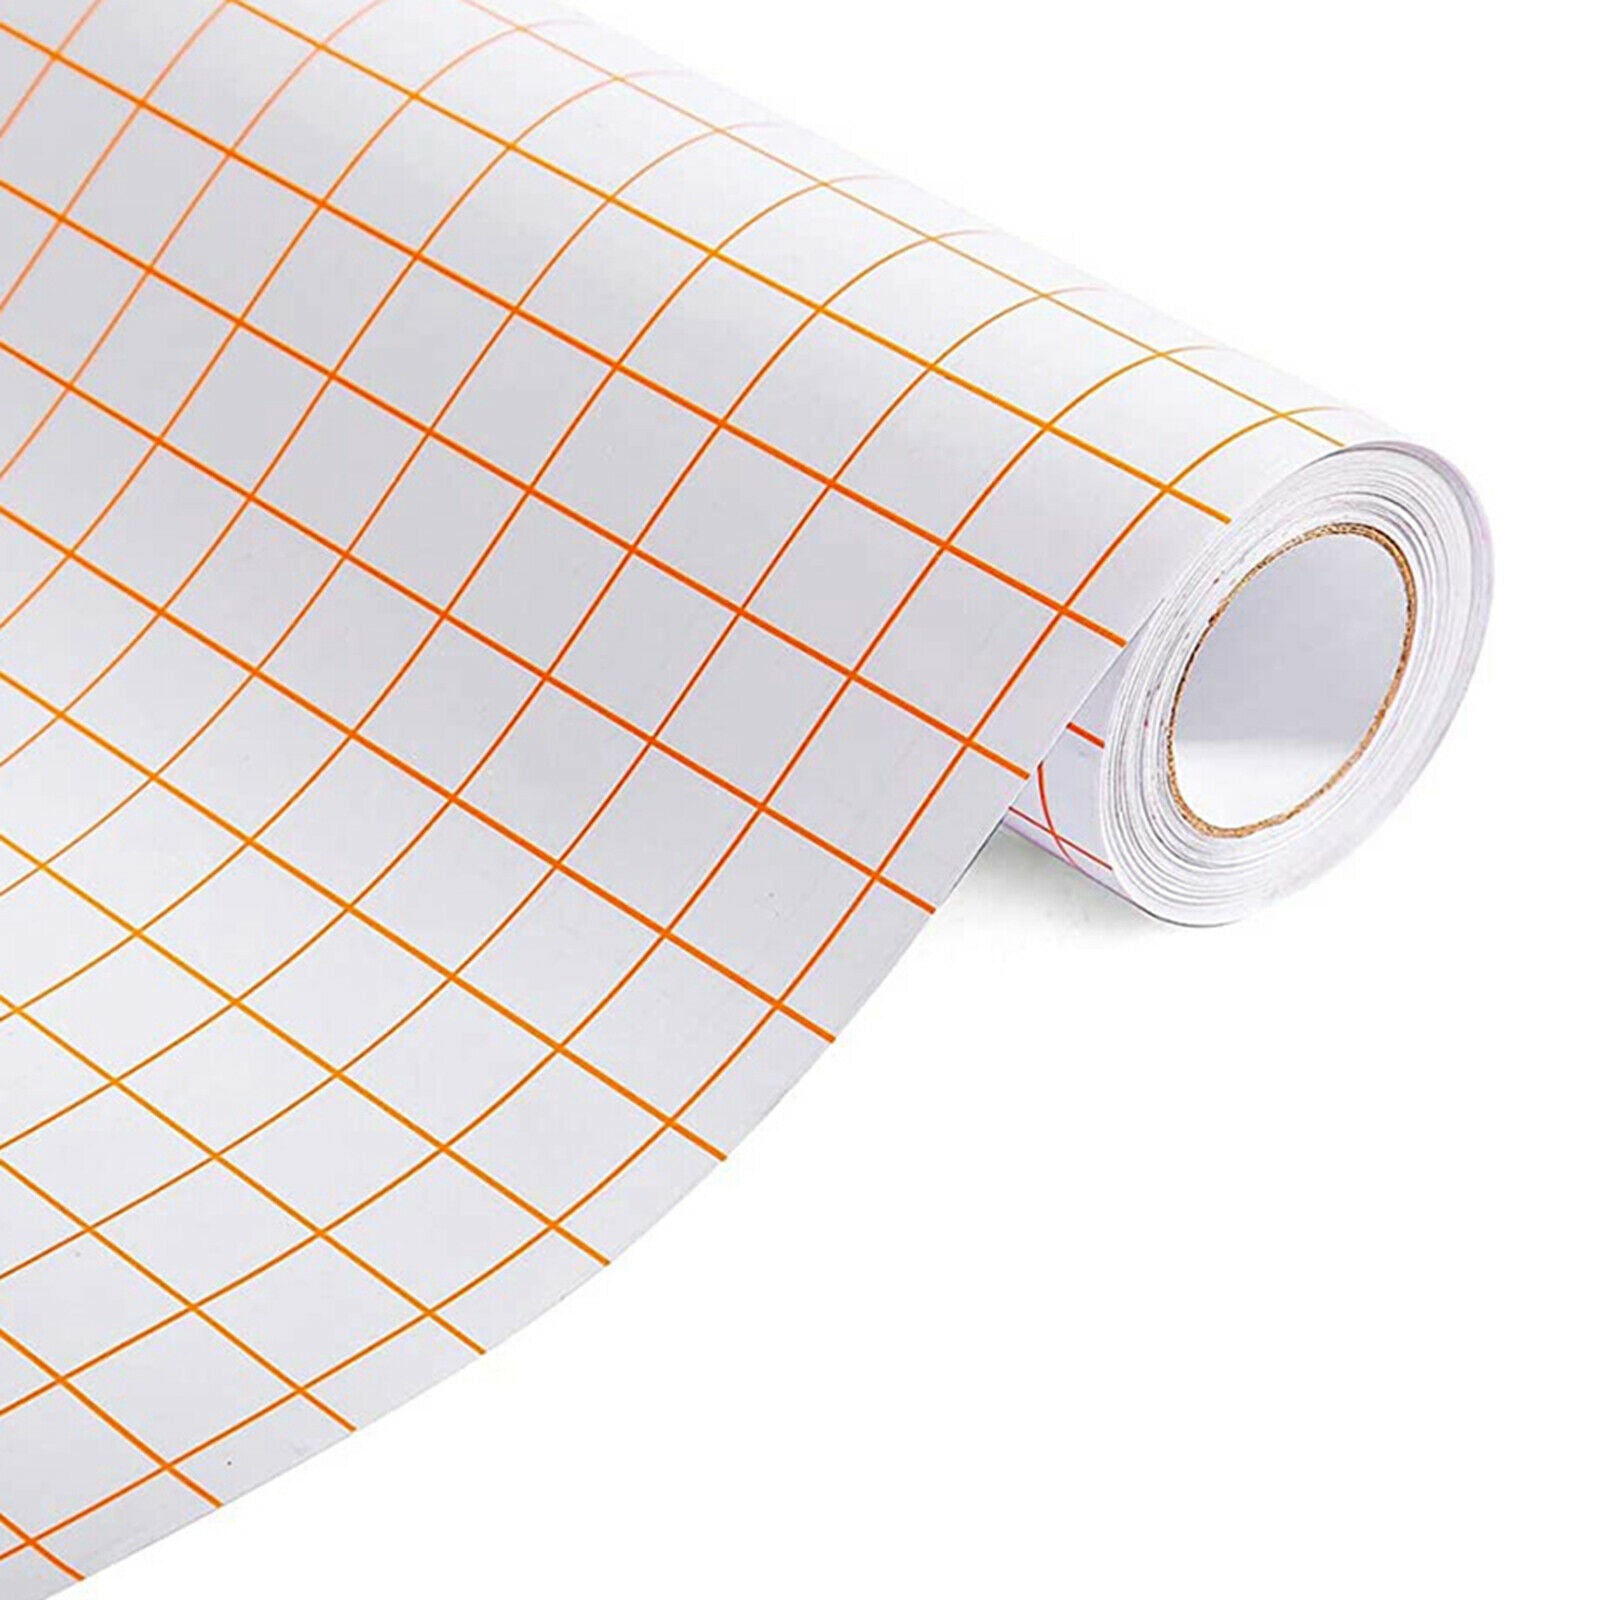 Vinyl Transfer Paper Tape Roll 12" x 79 inch with Alignment Grids Decals Windows